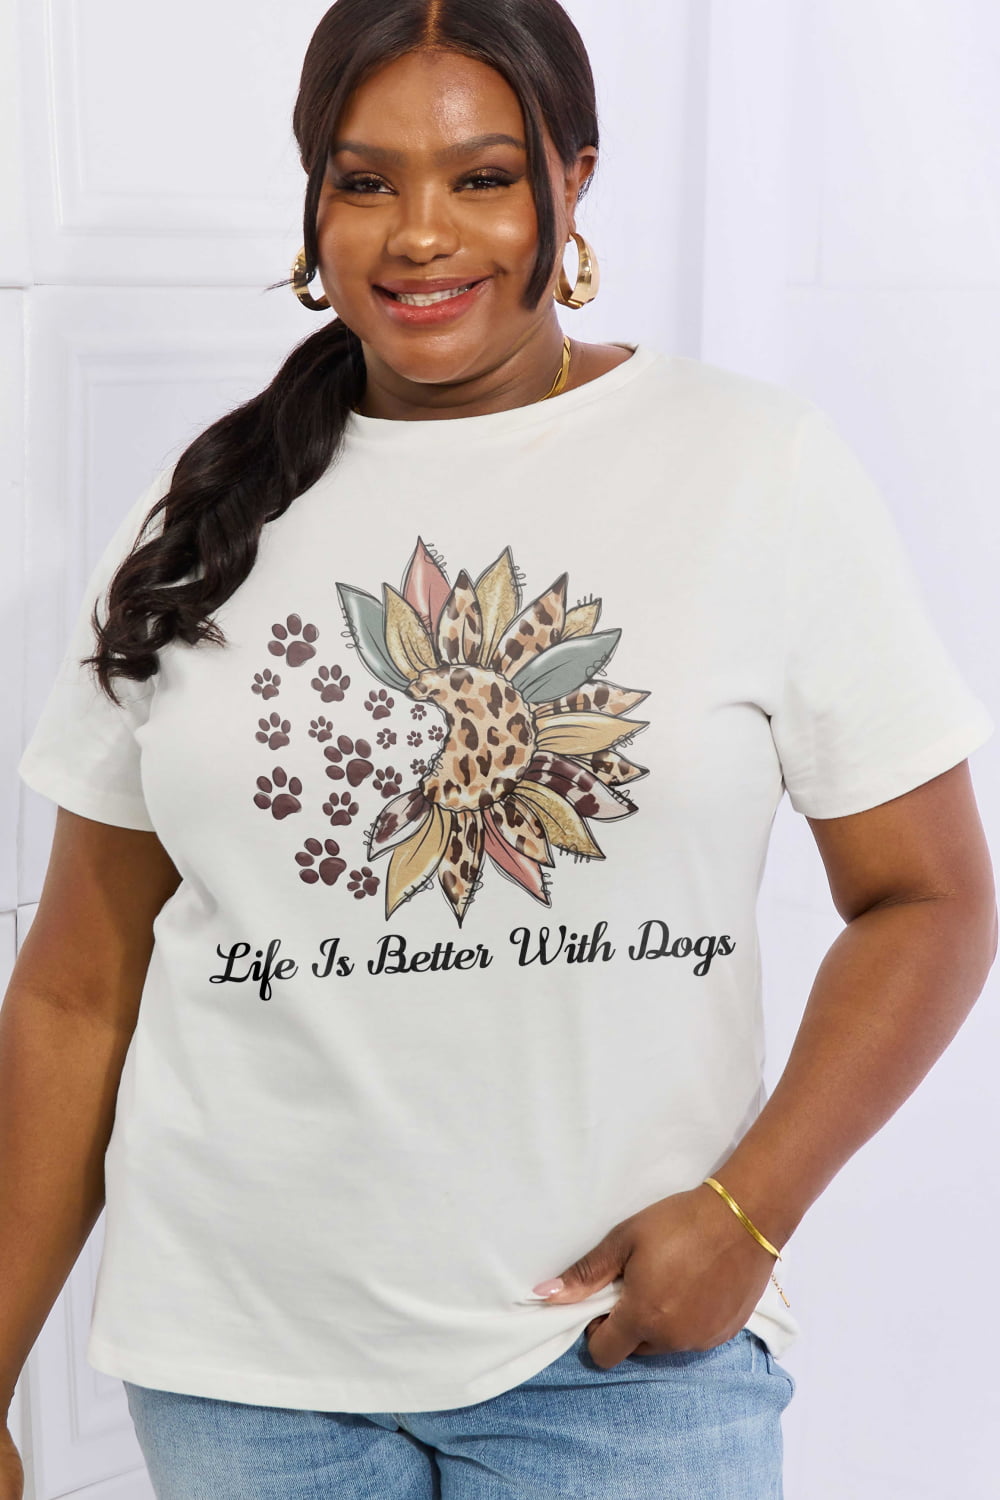 Simply Love Full Size LIFE IS BETTER WITH DOGS Graphic Cotton Tee